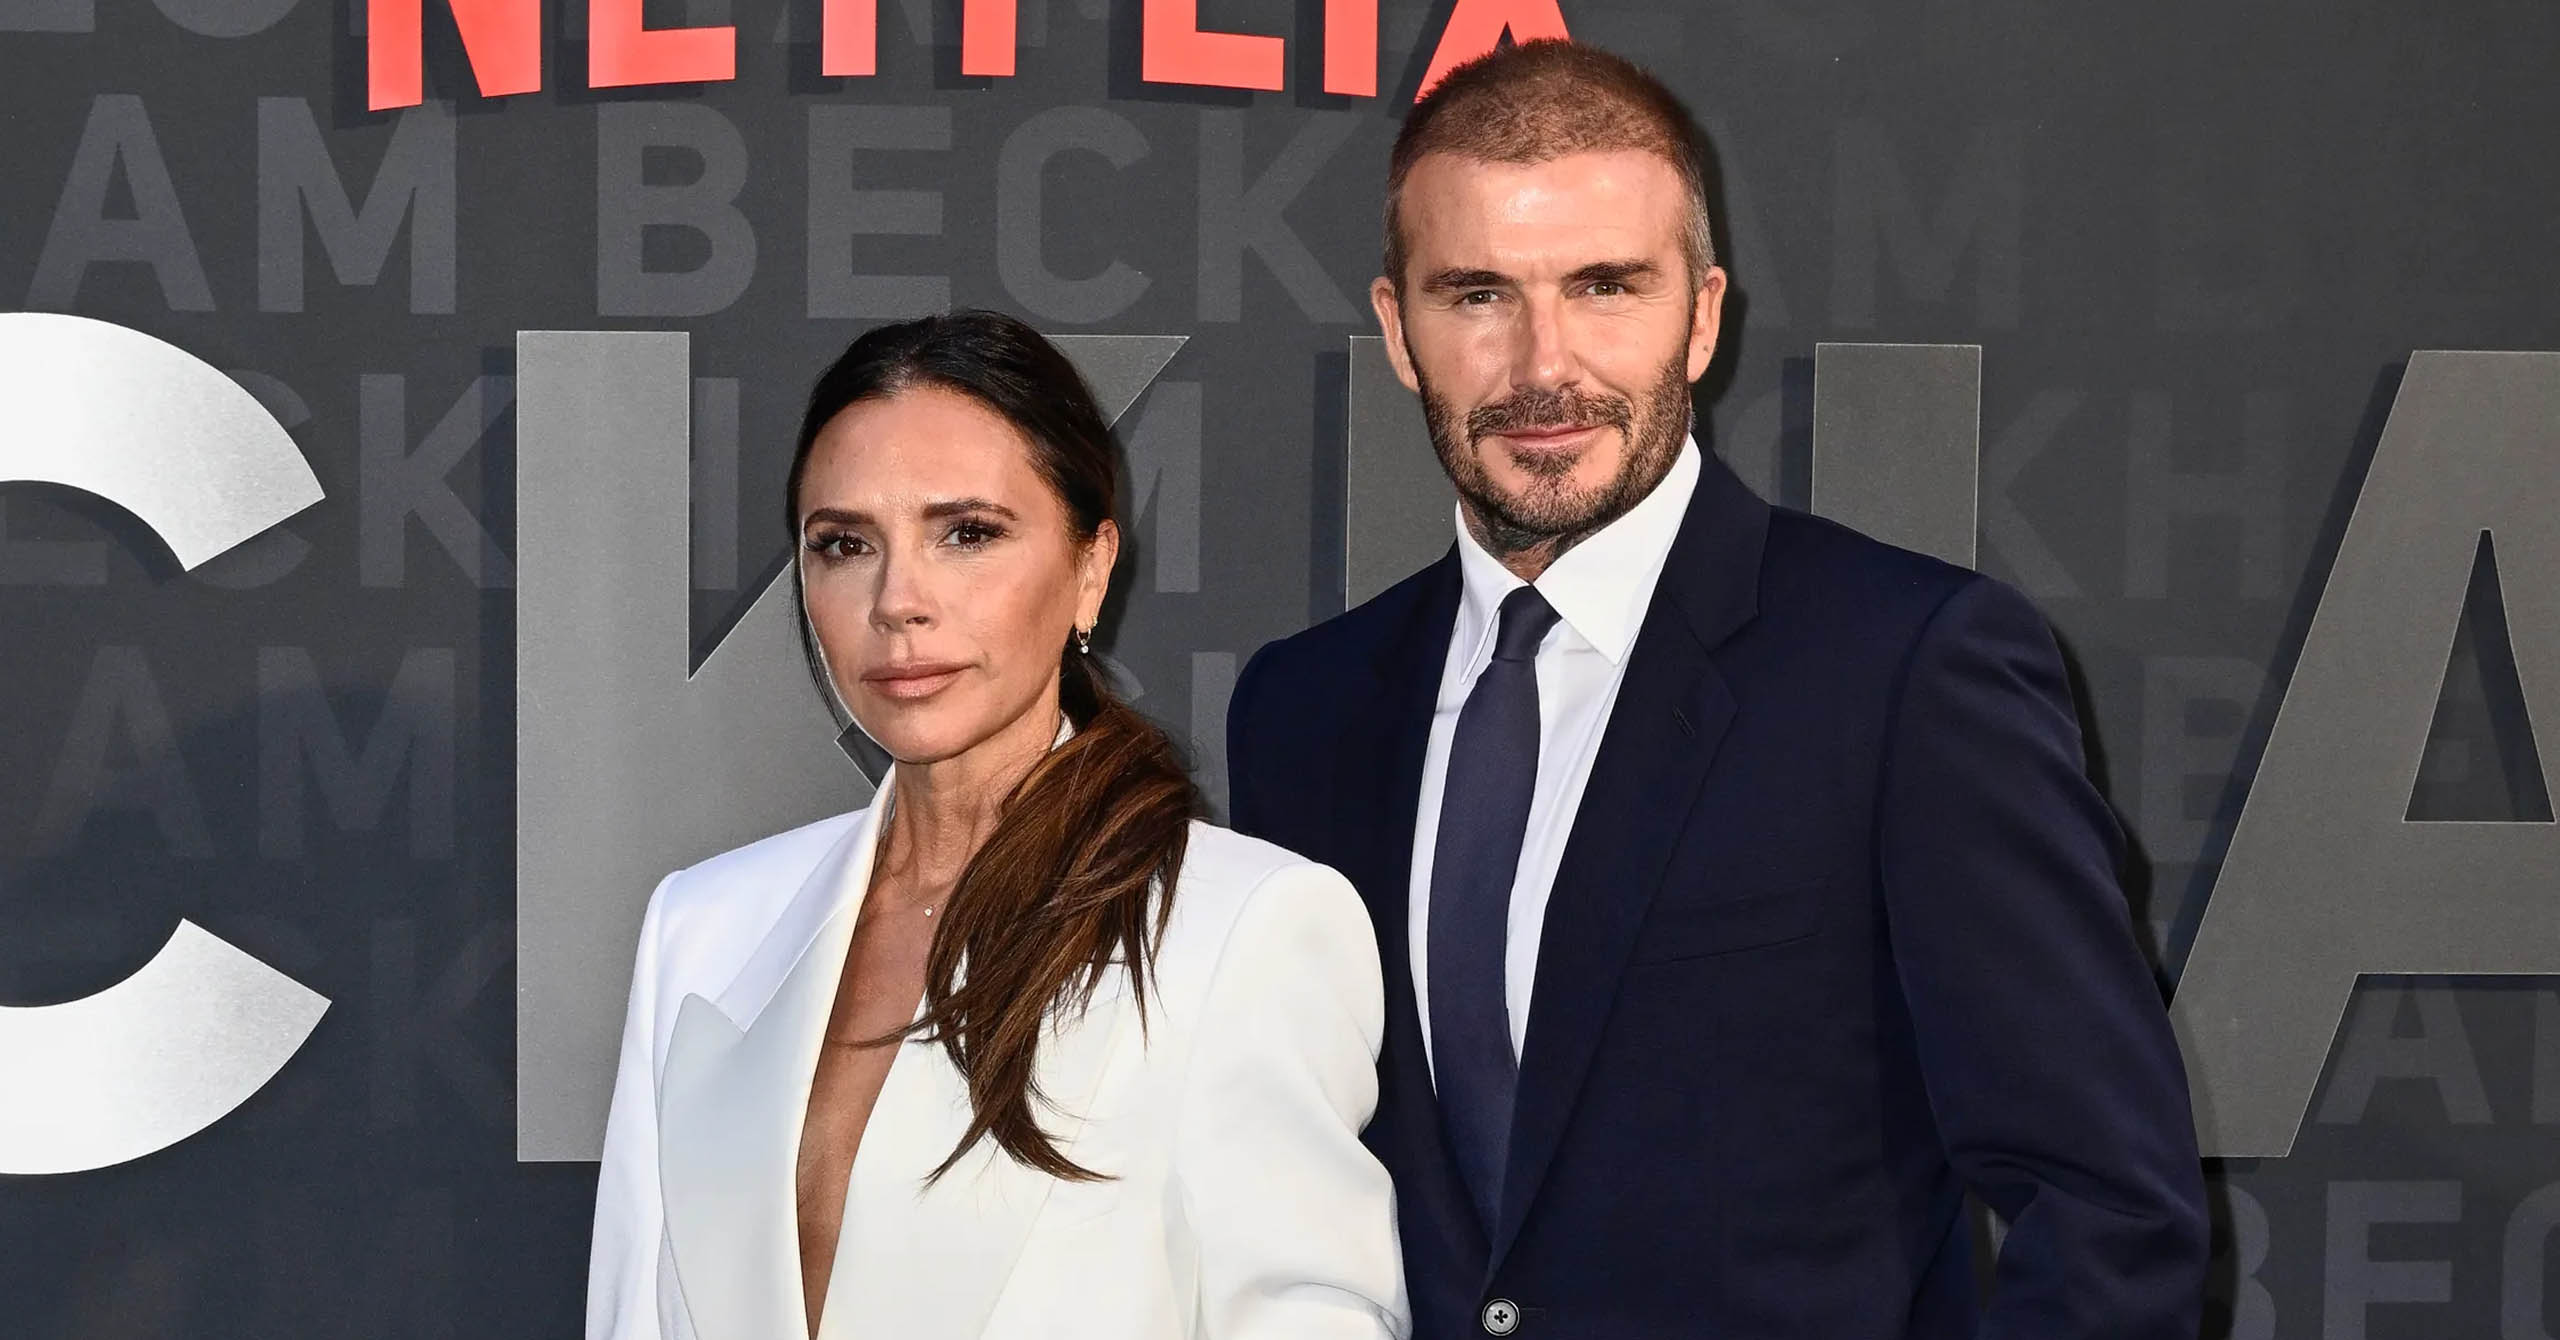 Victoria and David Beckham Wore Suits to the Beckham Premiere